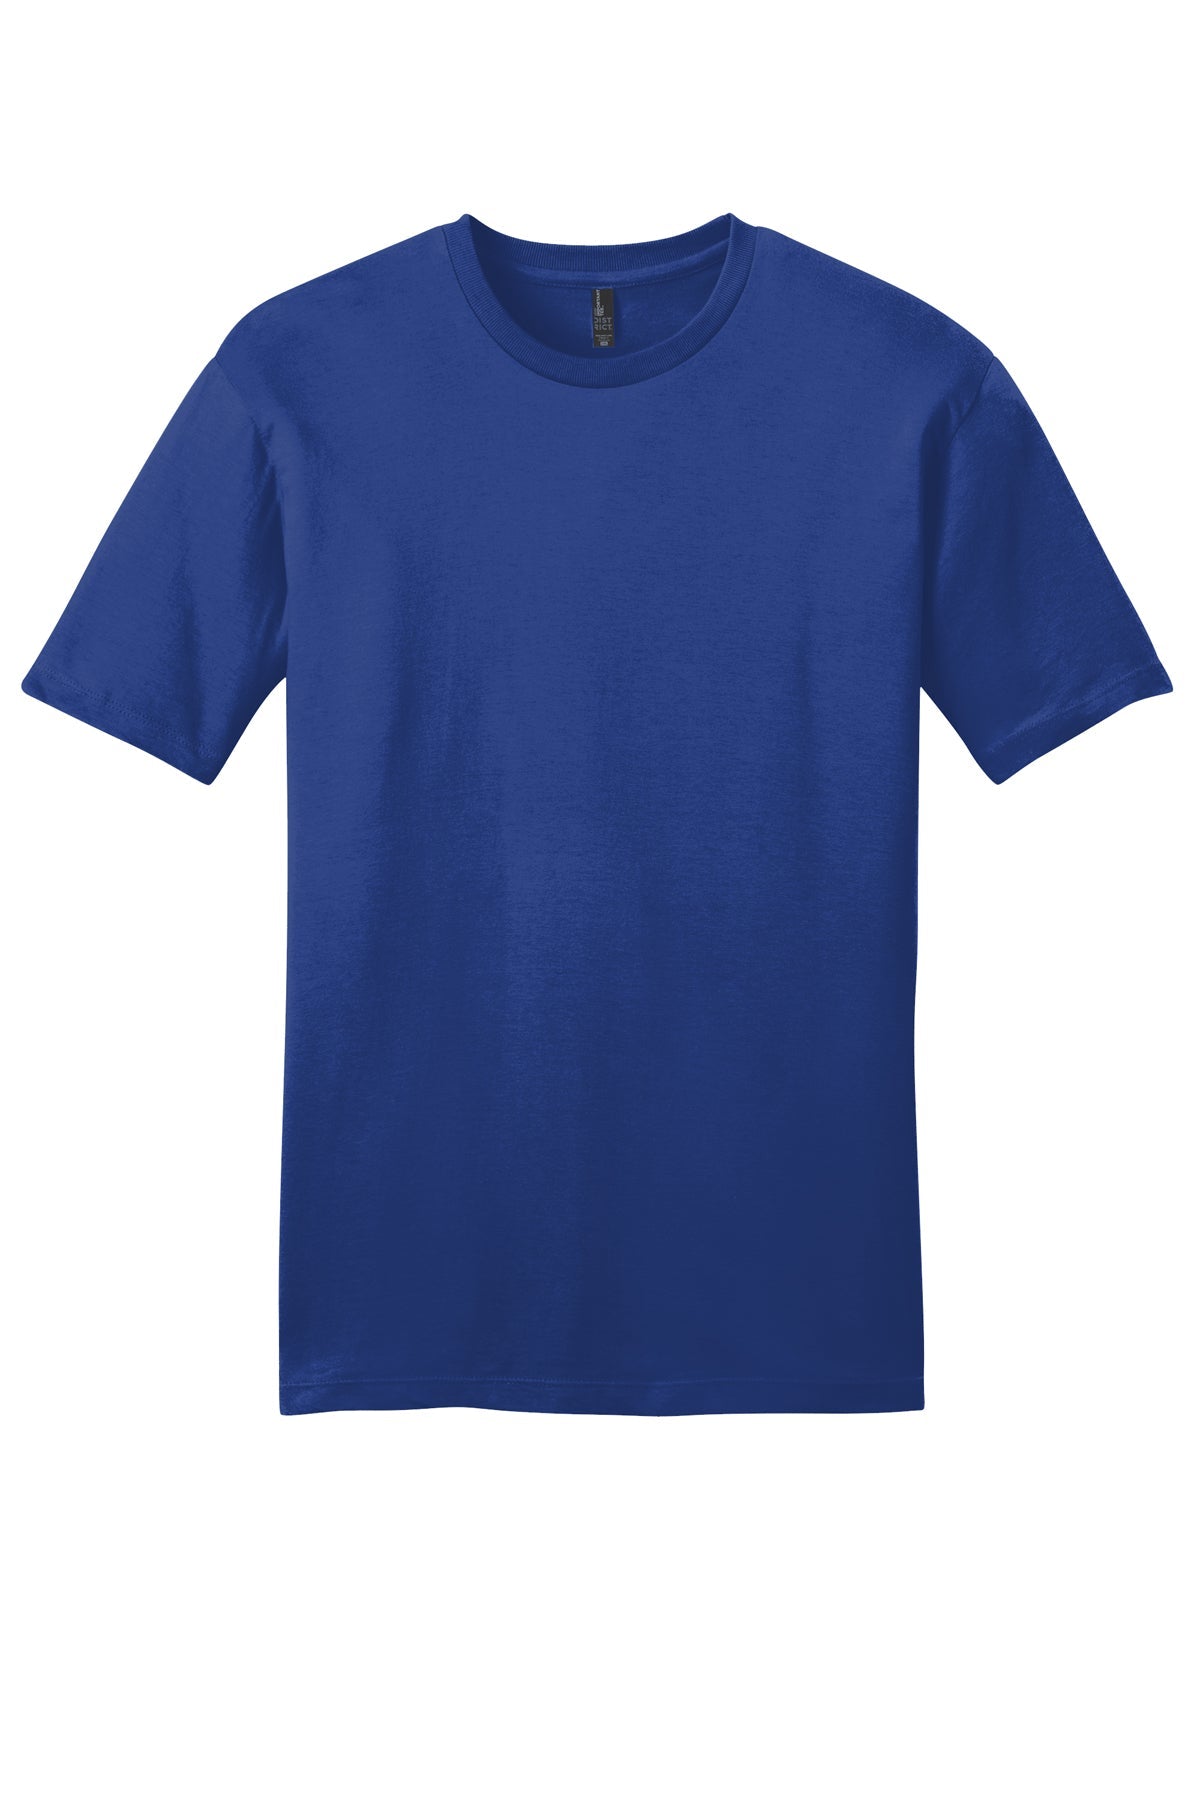 DT6000 District ® Very Important Tee ® XS-4XL